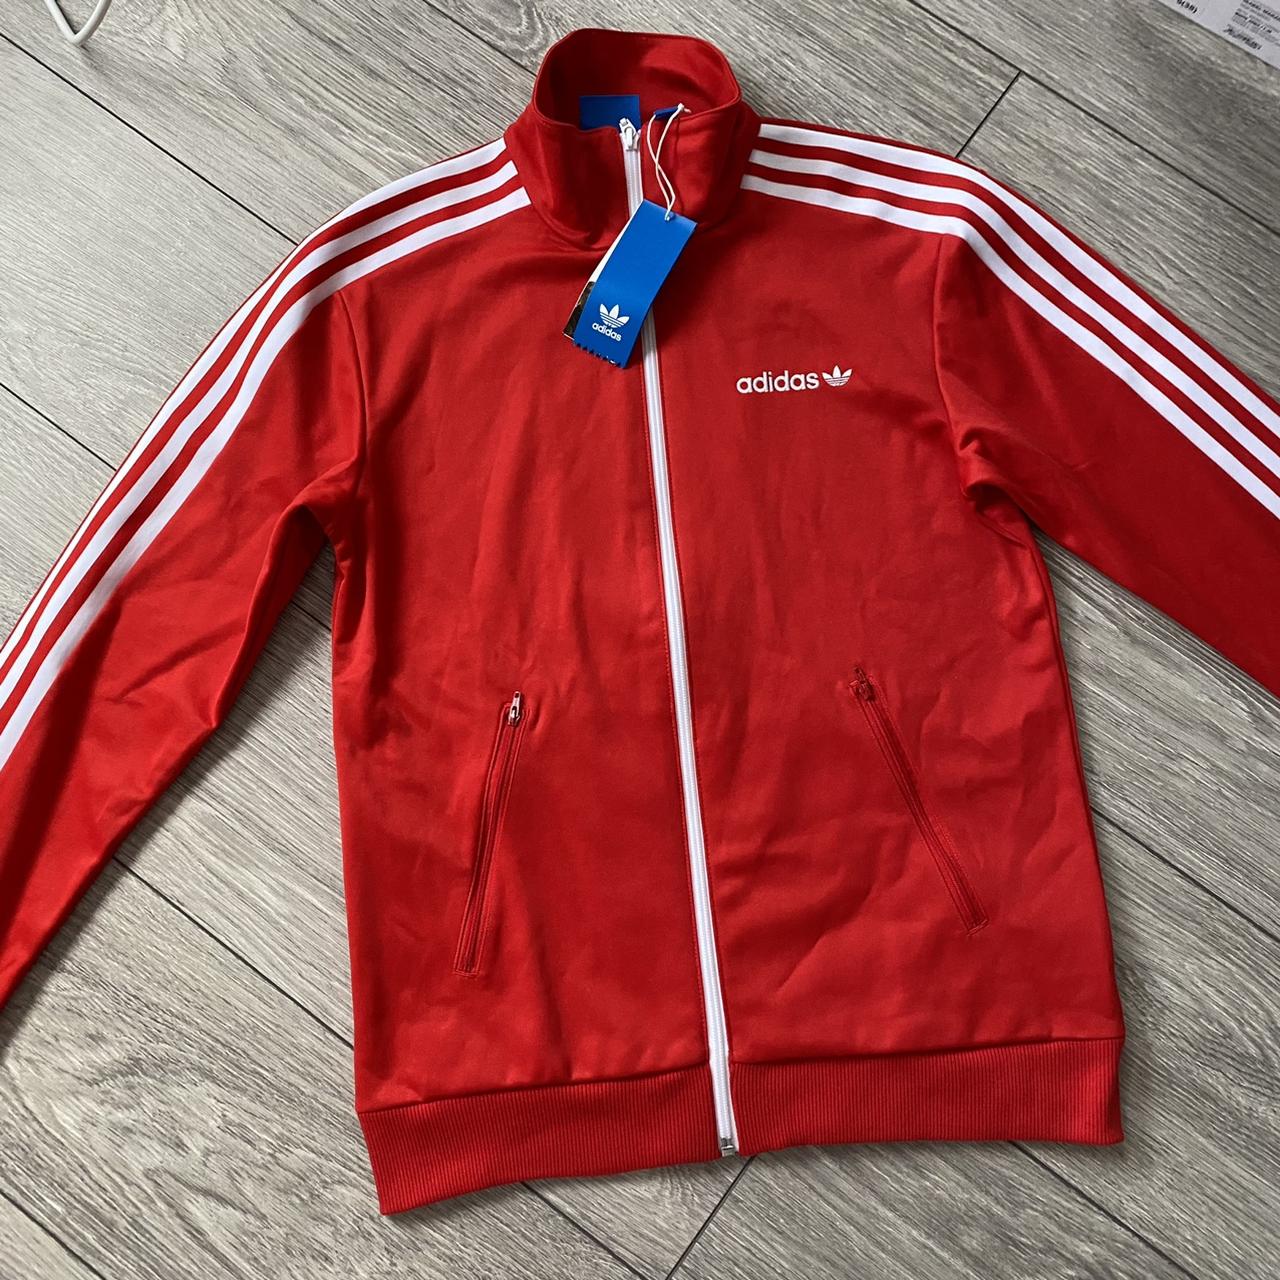 Adidas women’s red and white stripes track top 3... - Depop